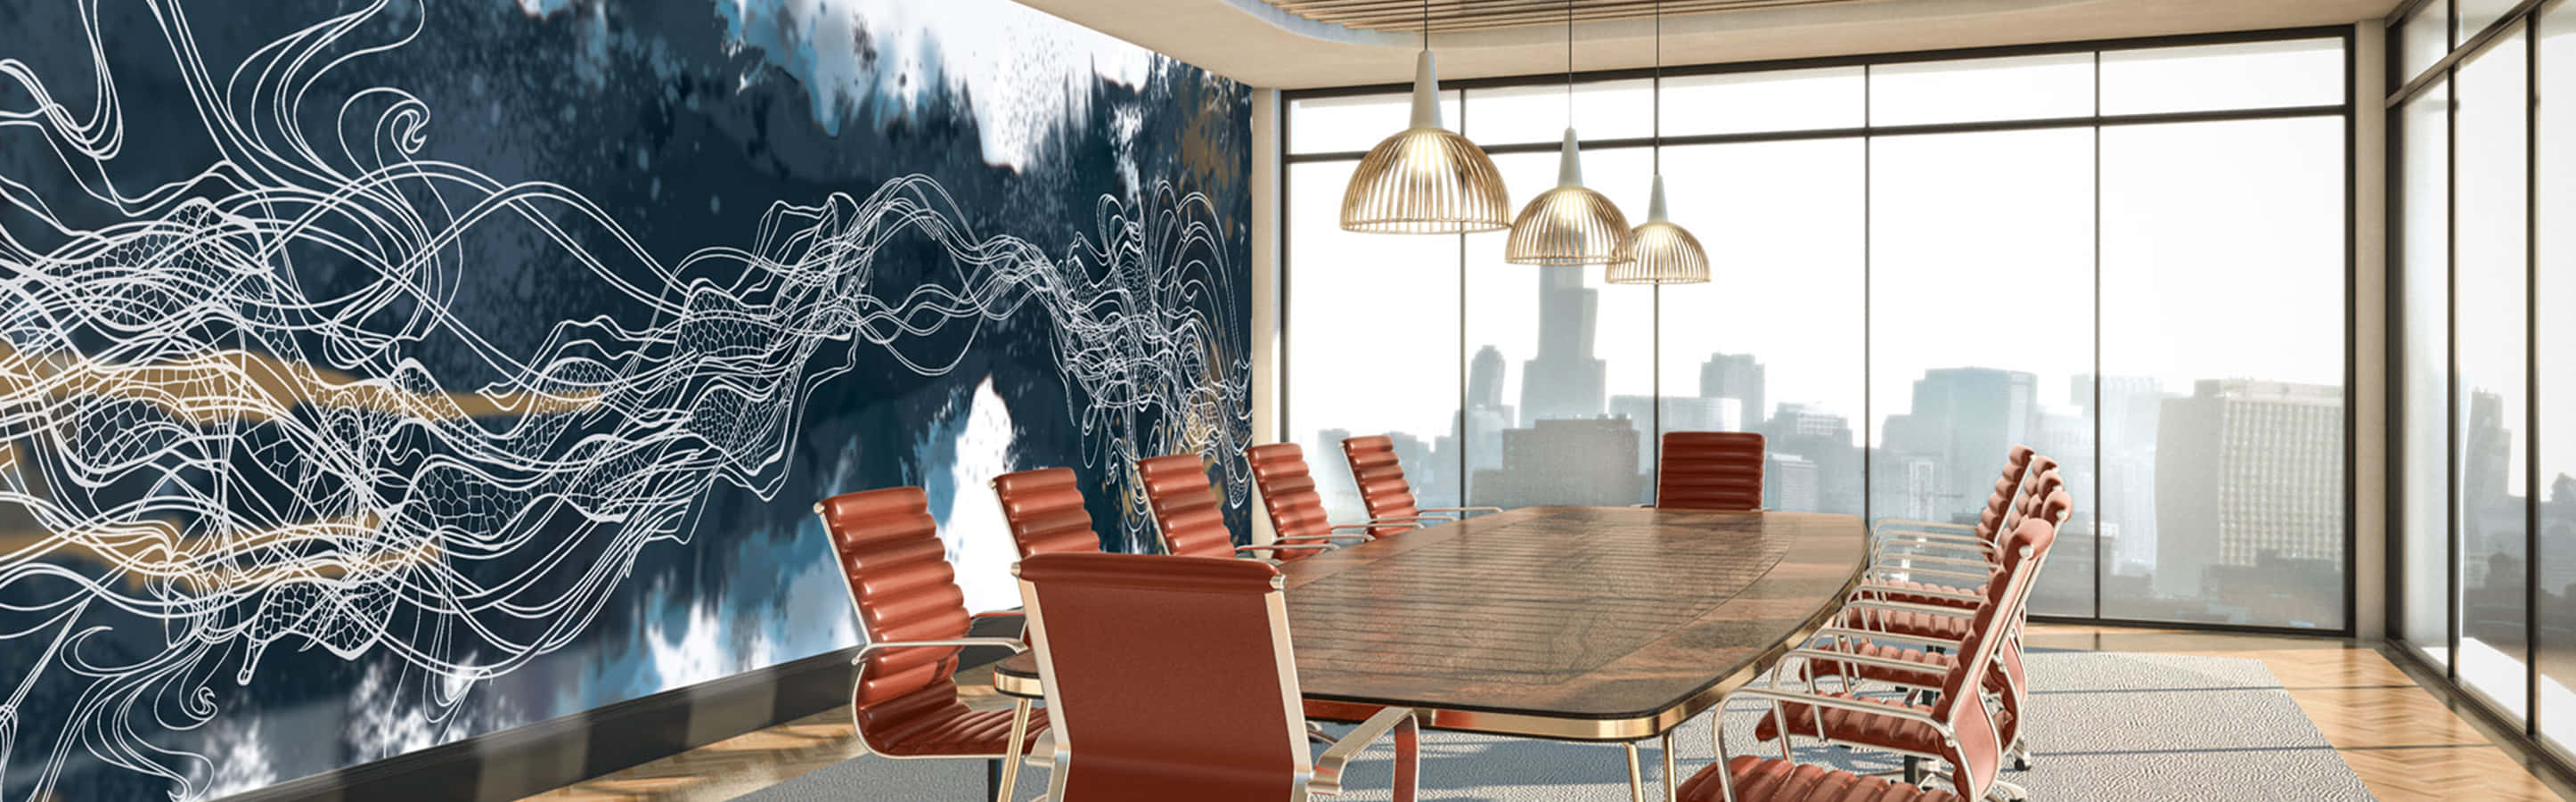 Modern Conference Room City View Wallpaper